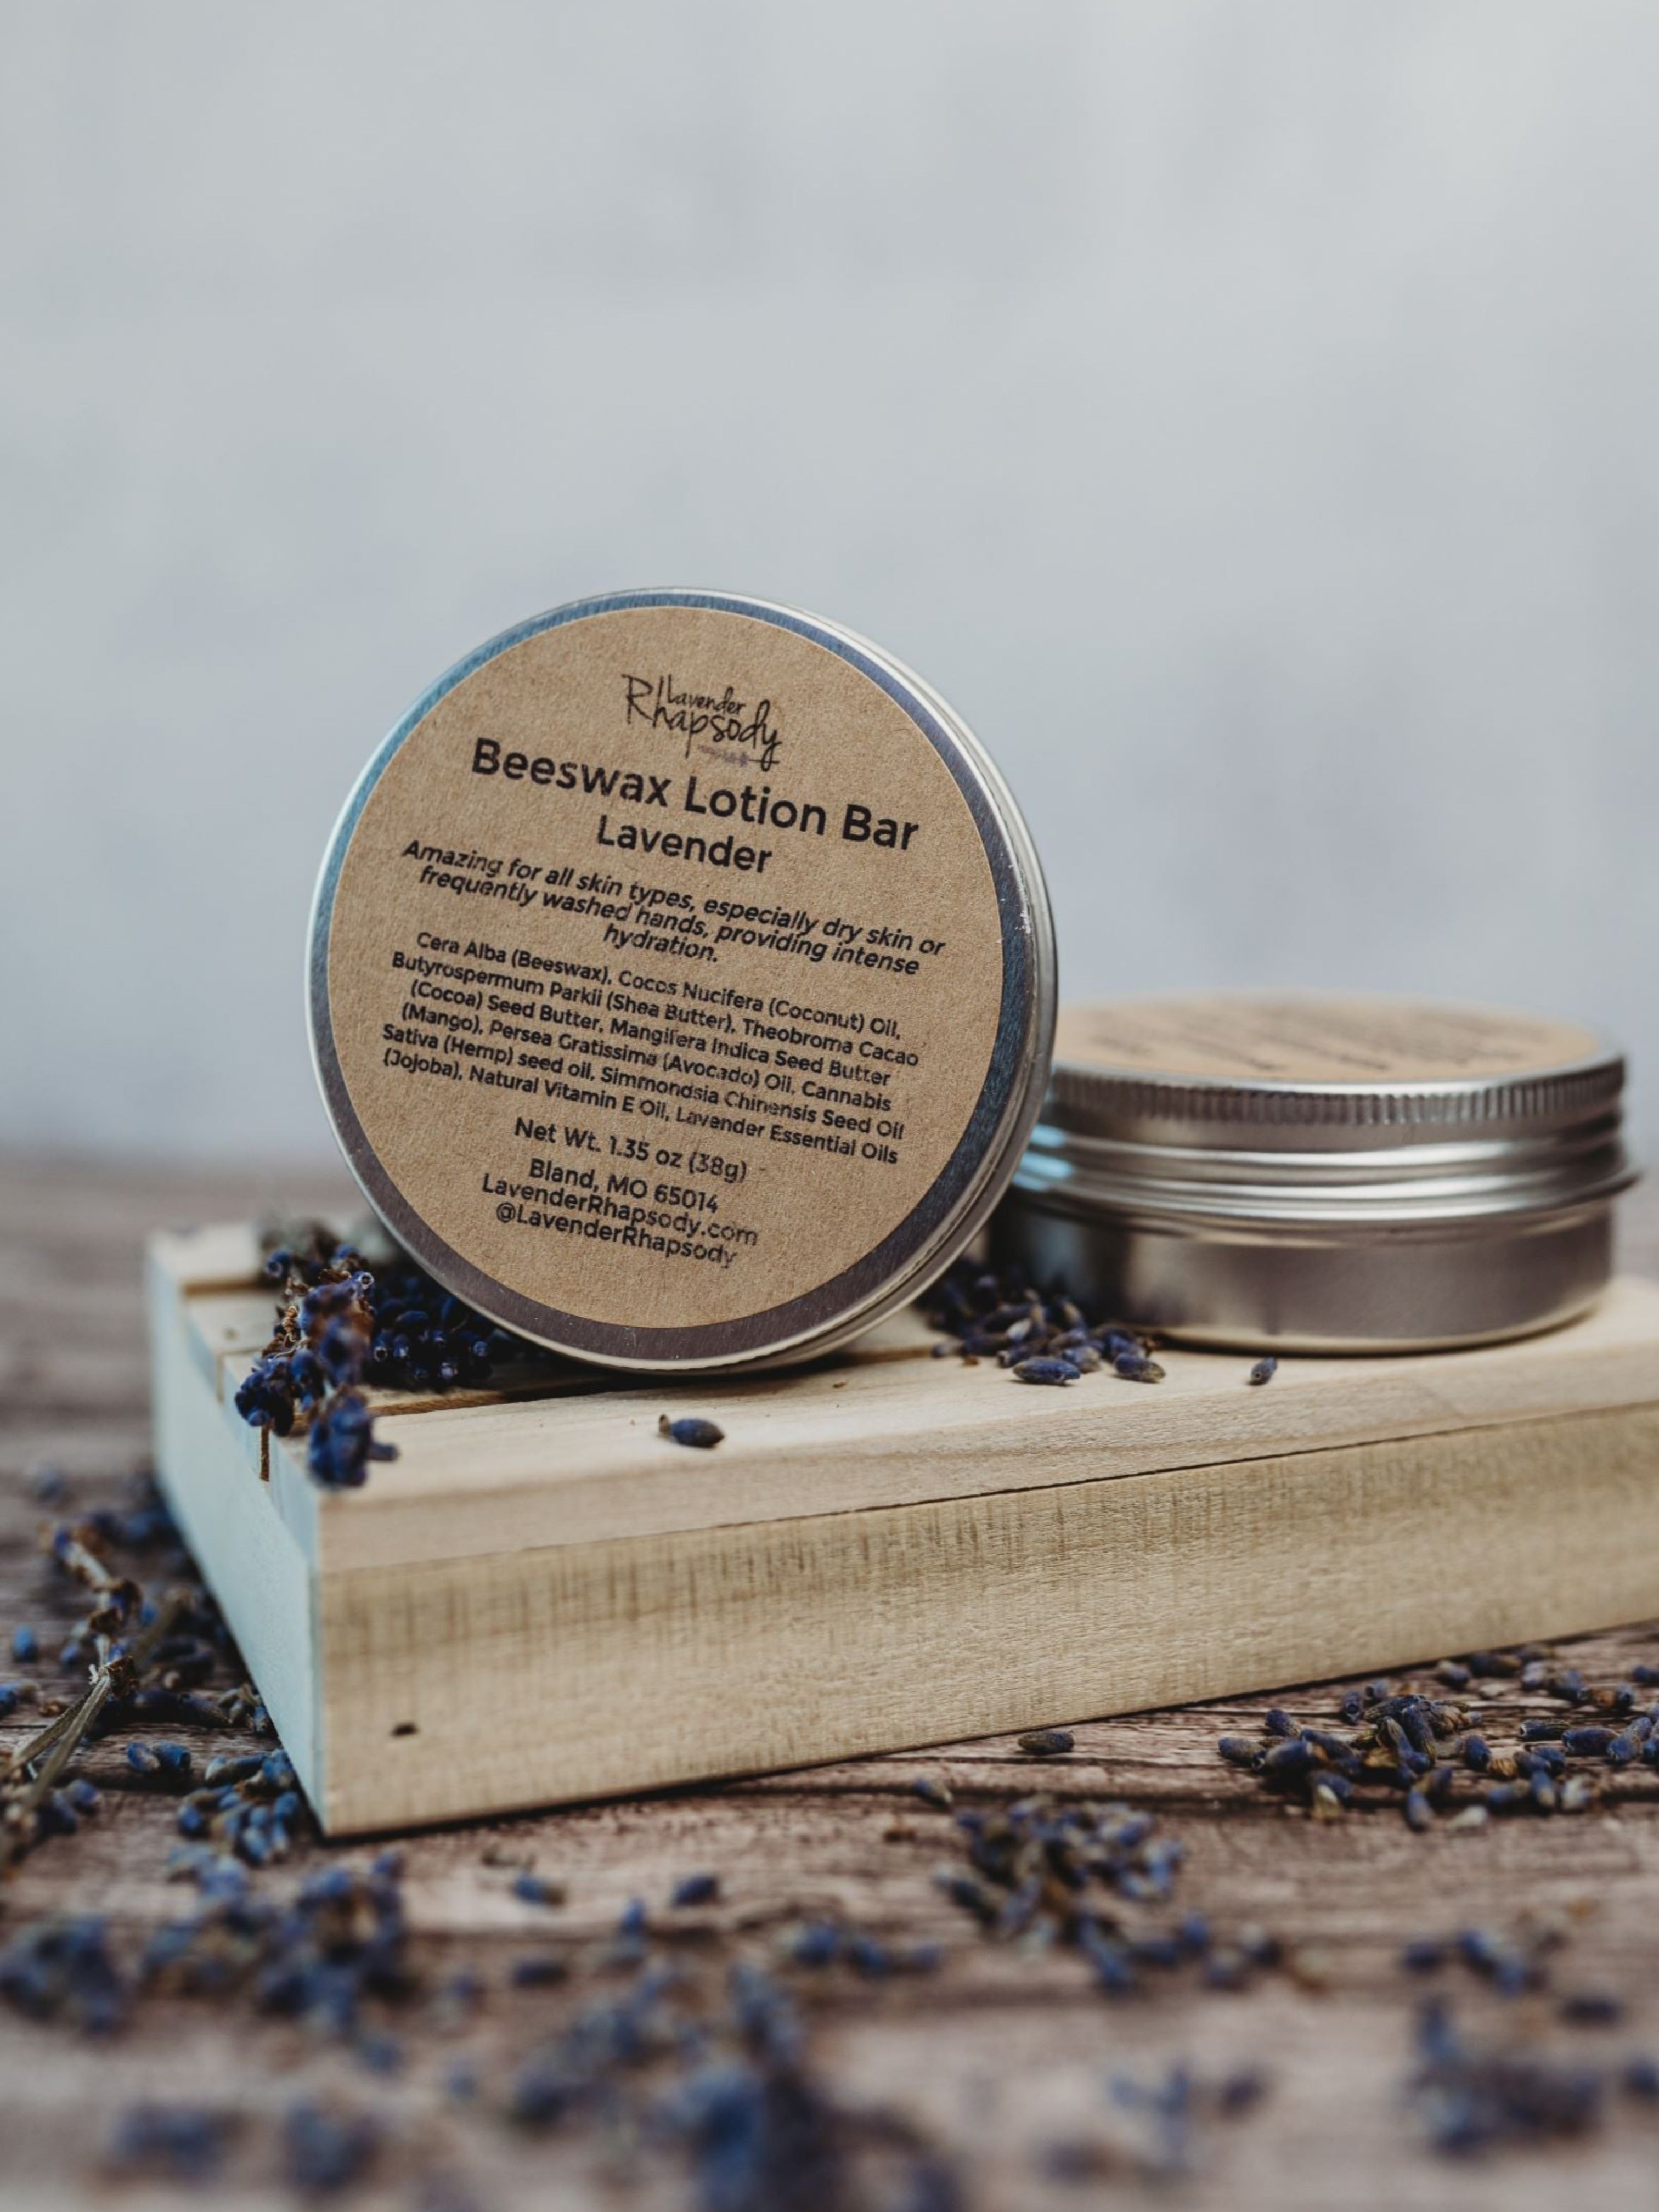 Beeswax Lavender Lotion Bar